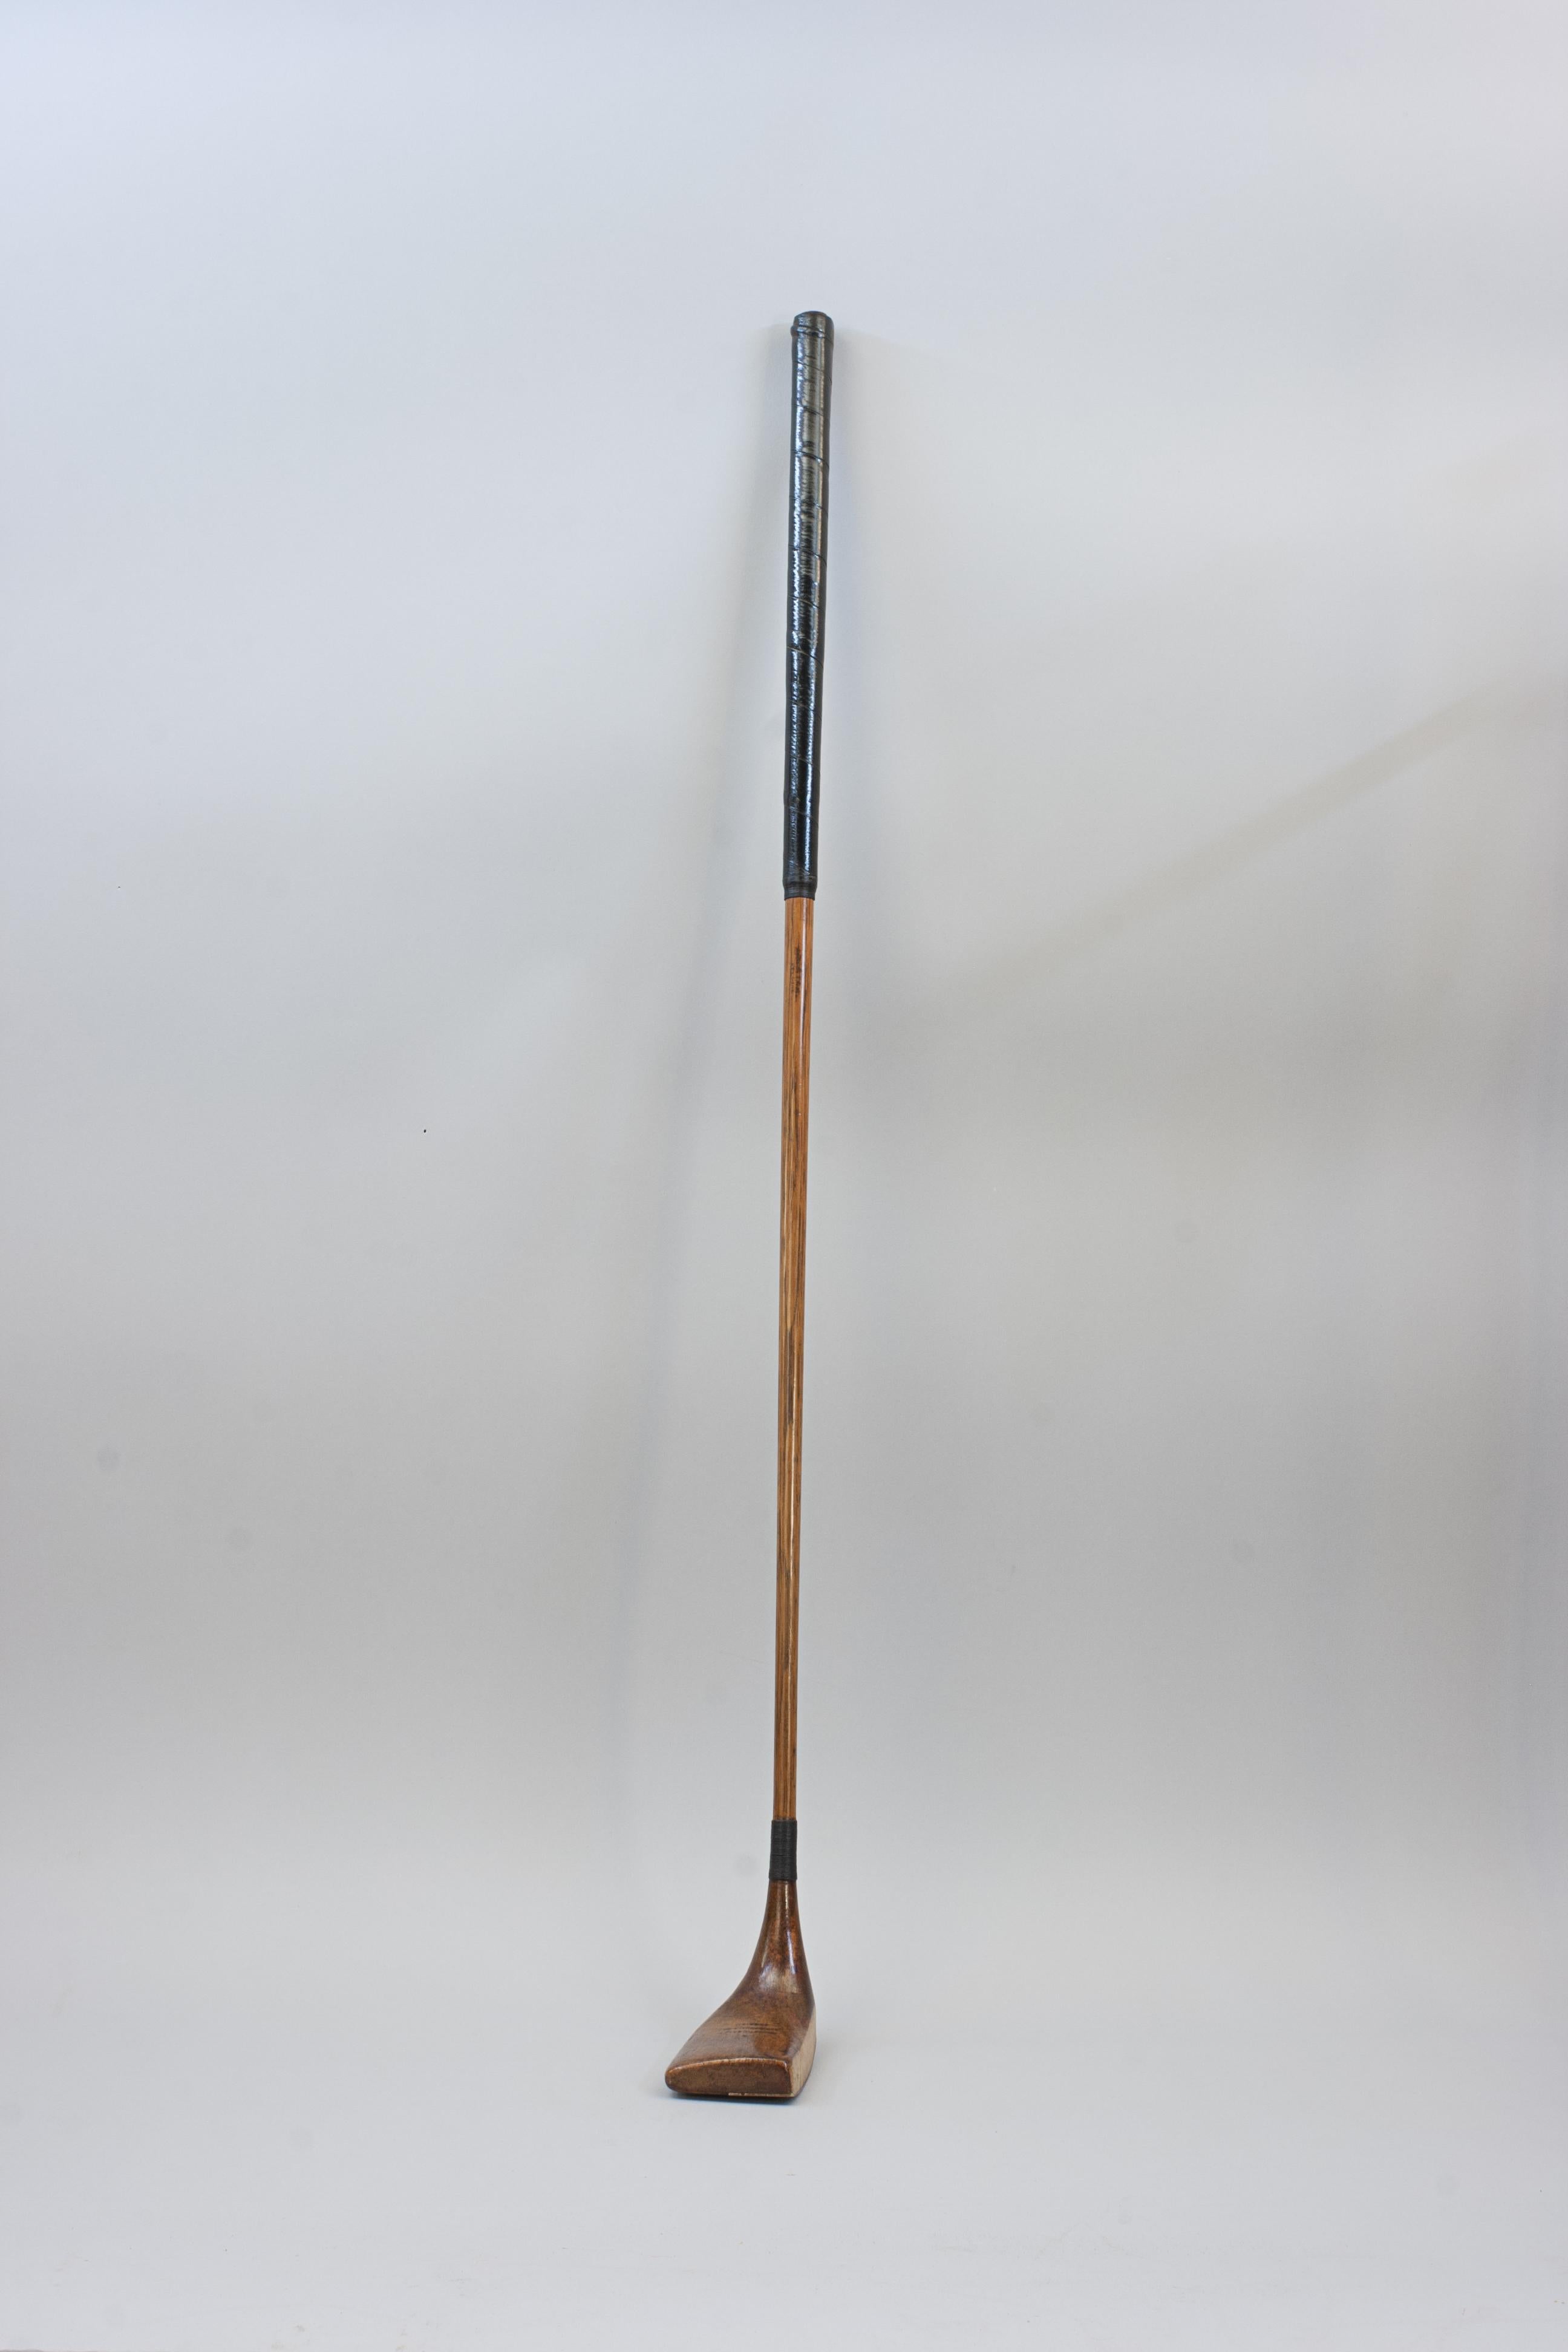 British Golf Club, Gassiat Type Putter by Ernest F. Sales of Sunningdale For Sale